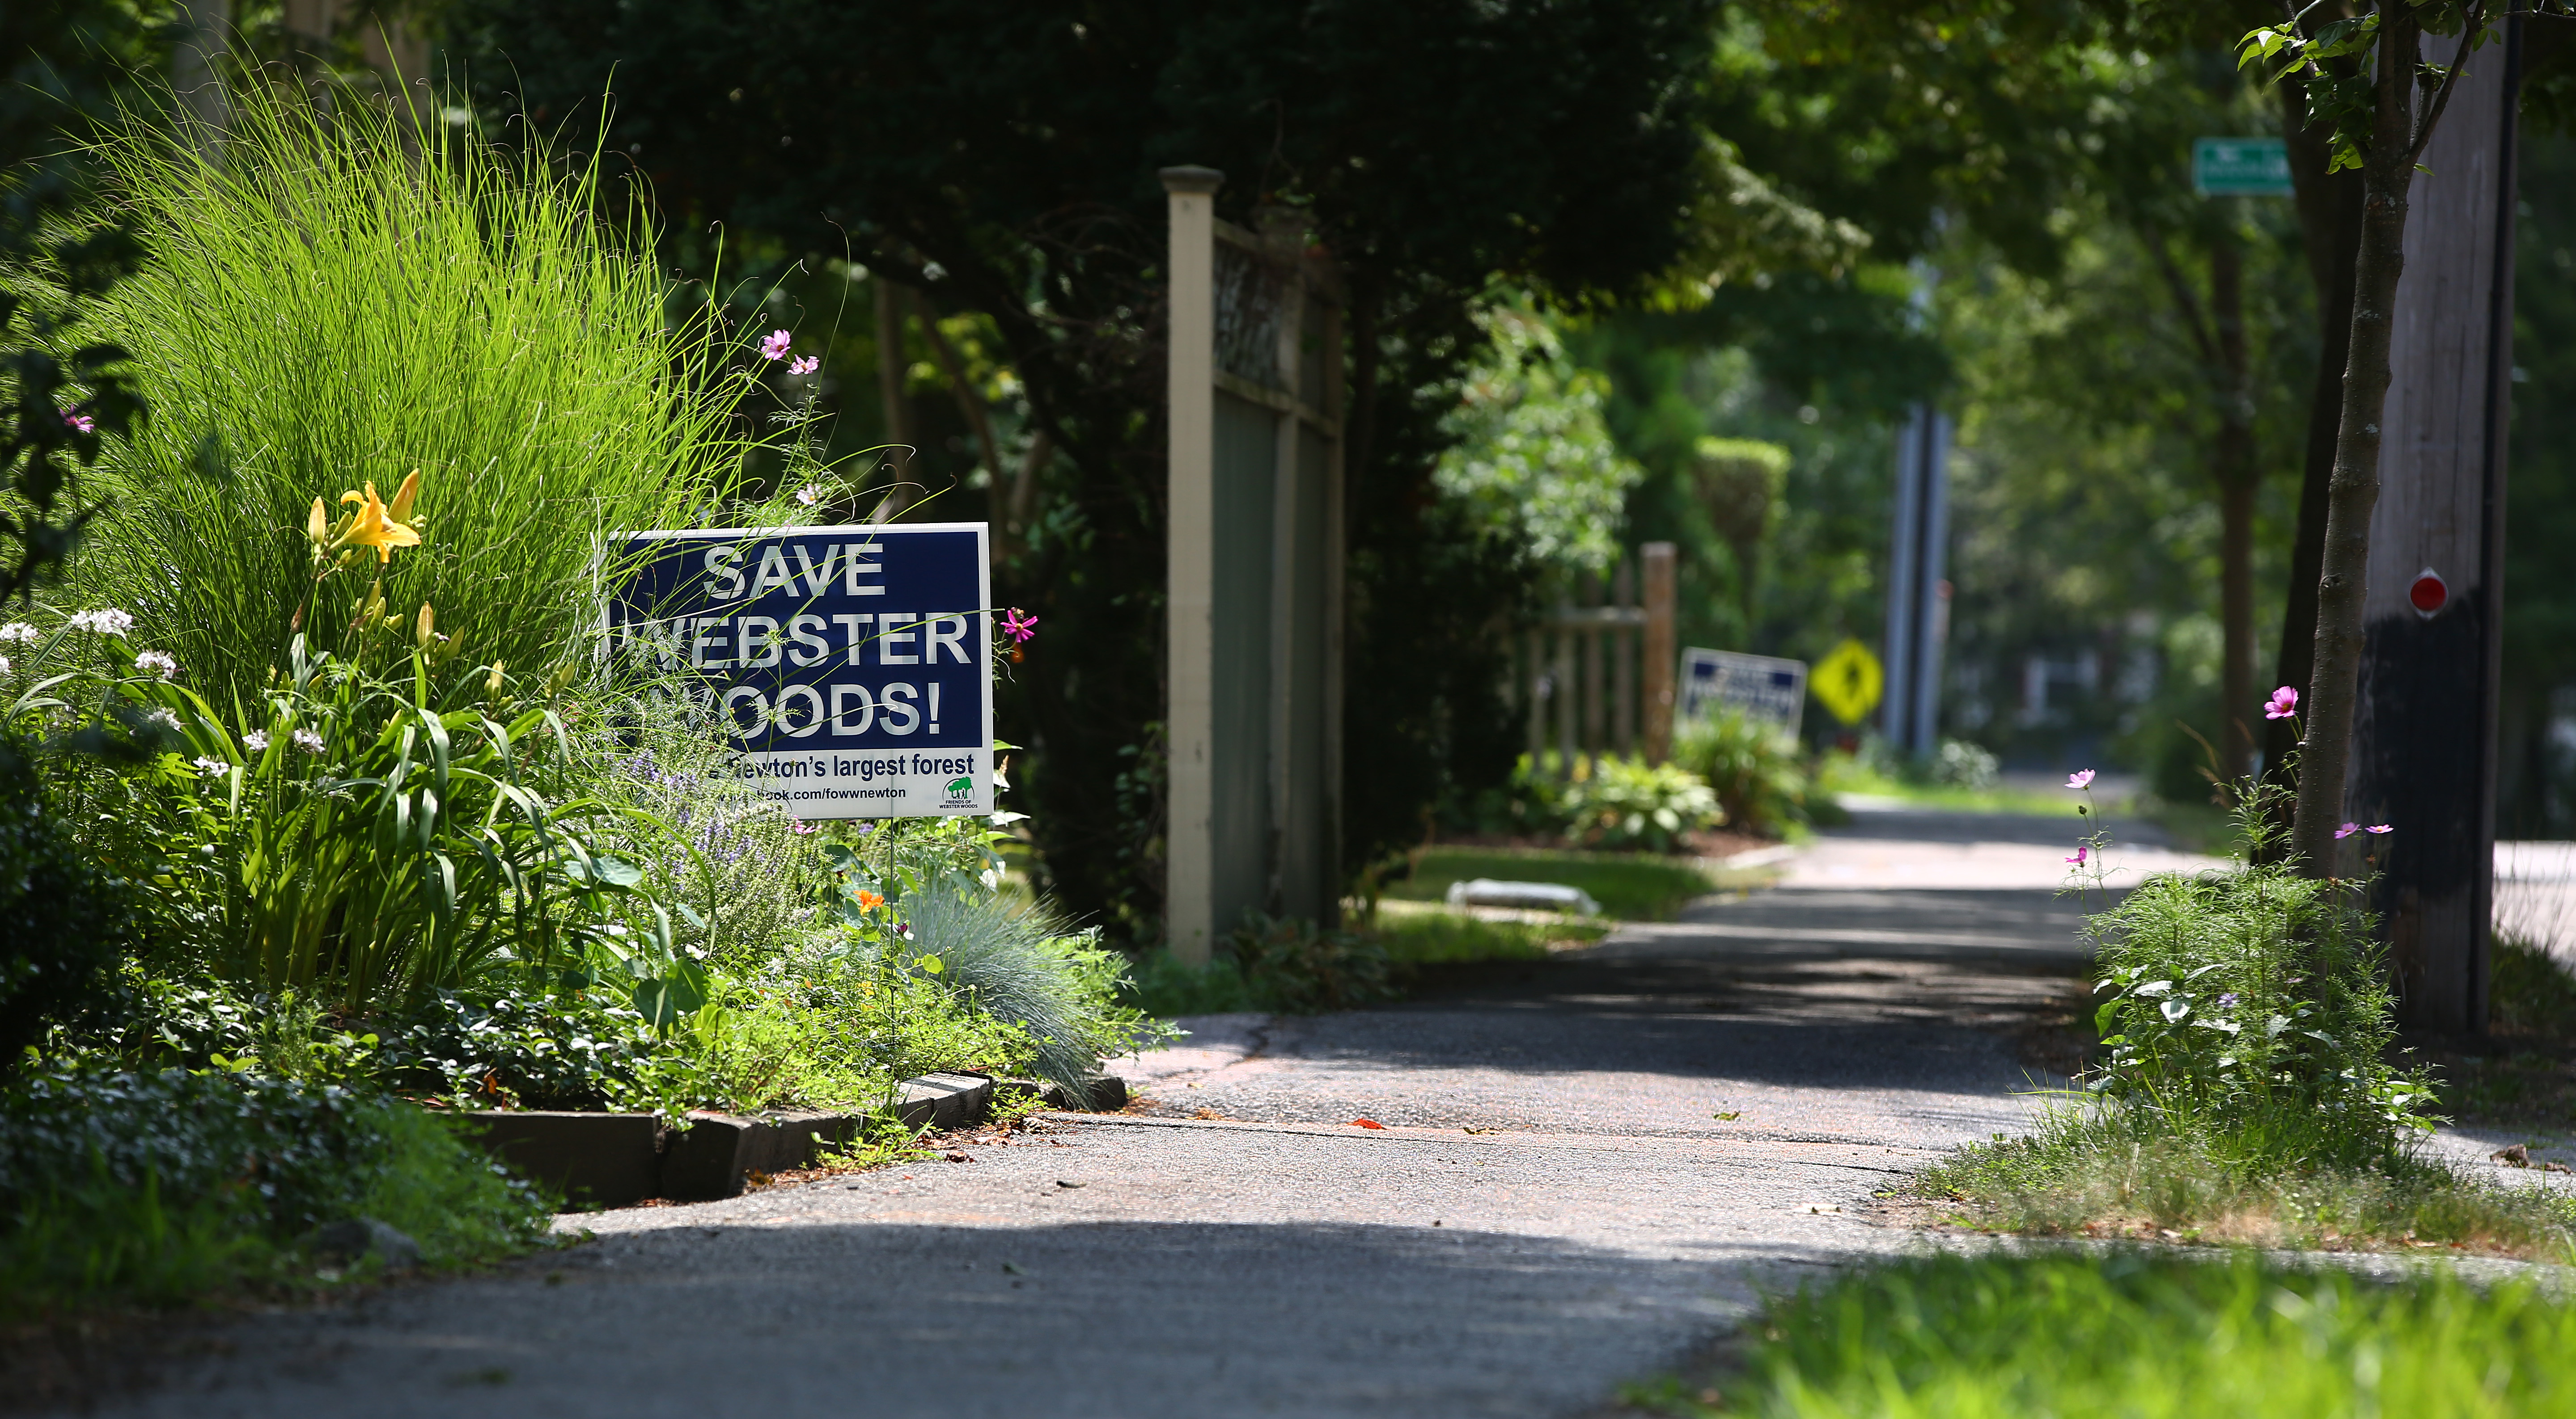 A sidewalk in a leafy suburb with a sign saying, “Save Webster Woods!” planted in the grass. 